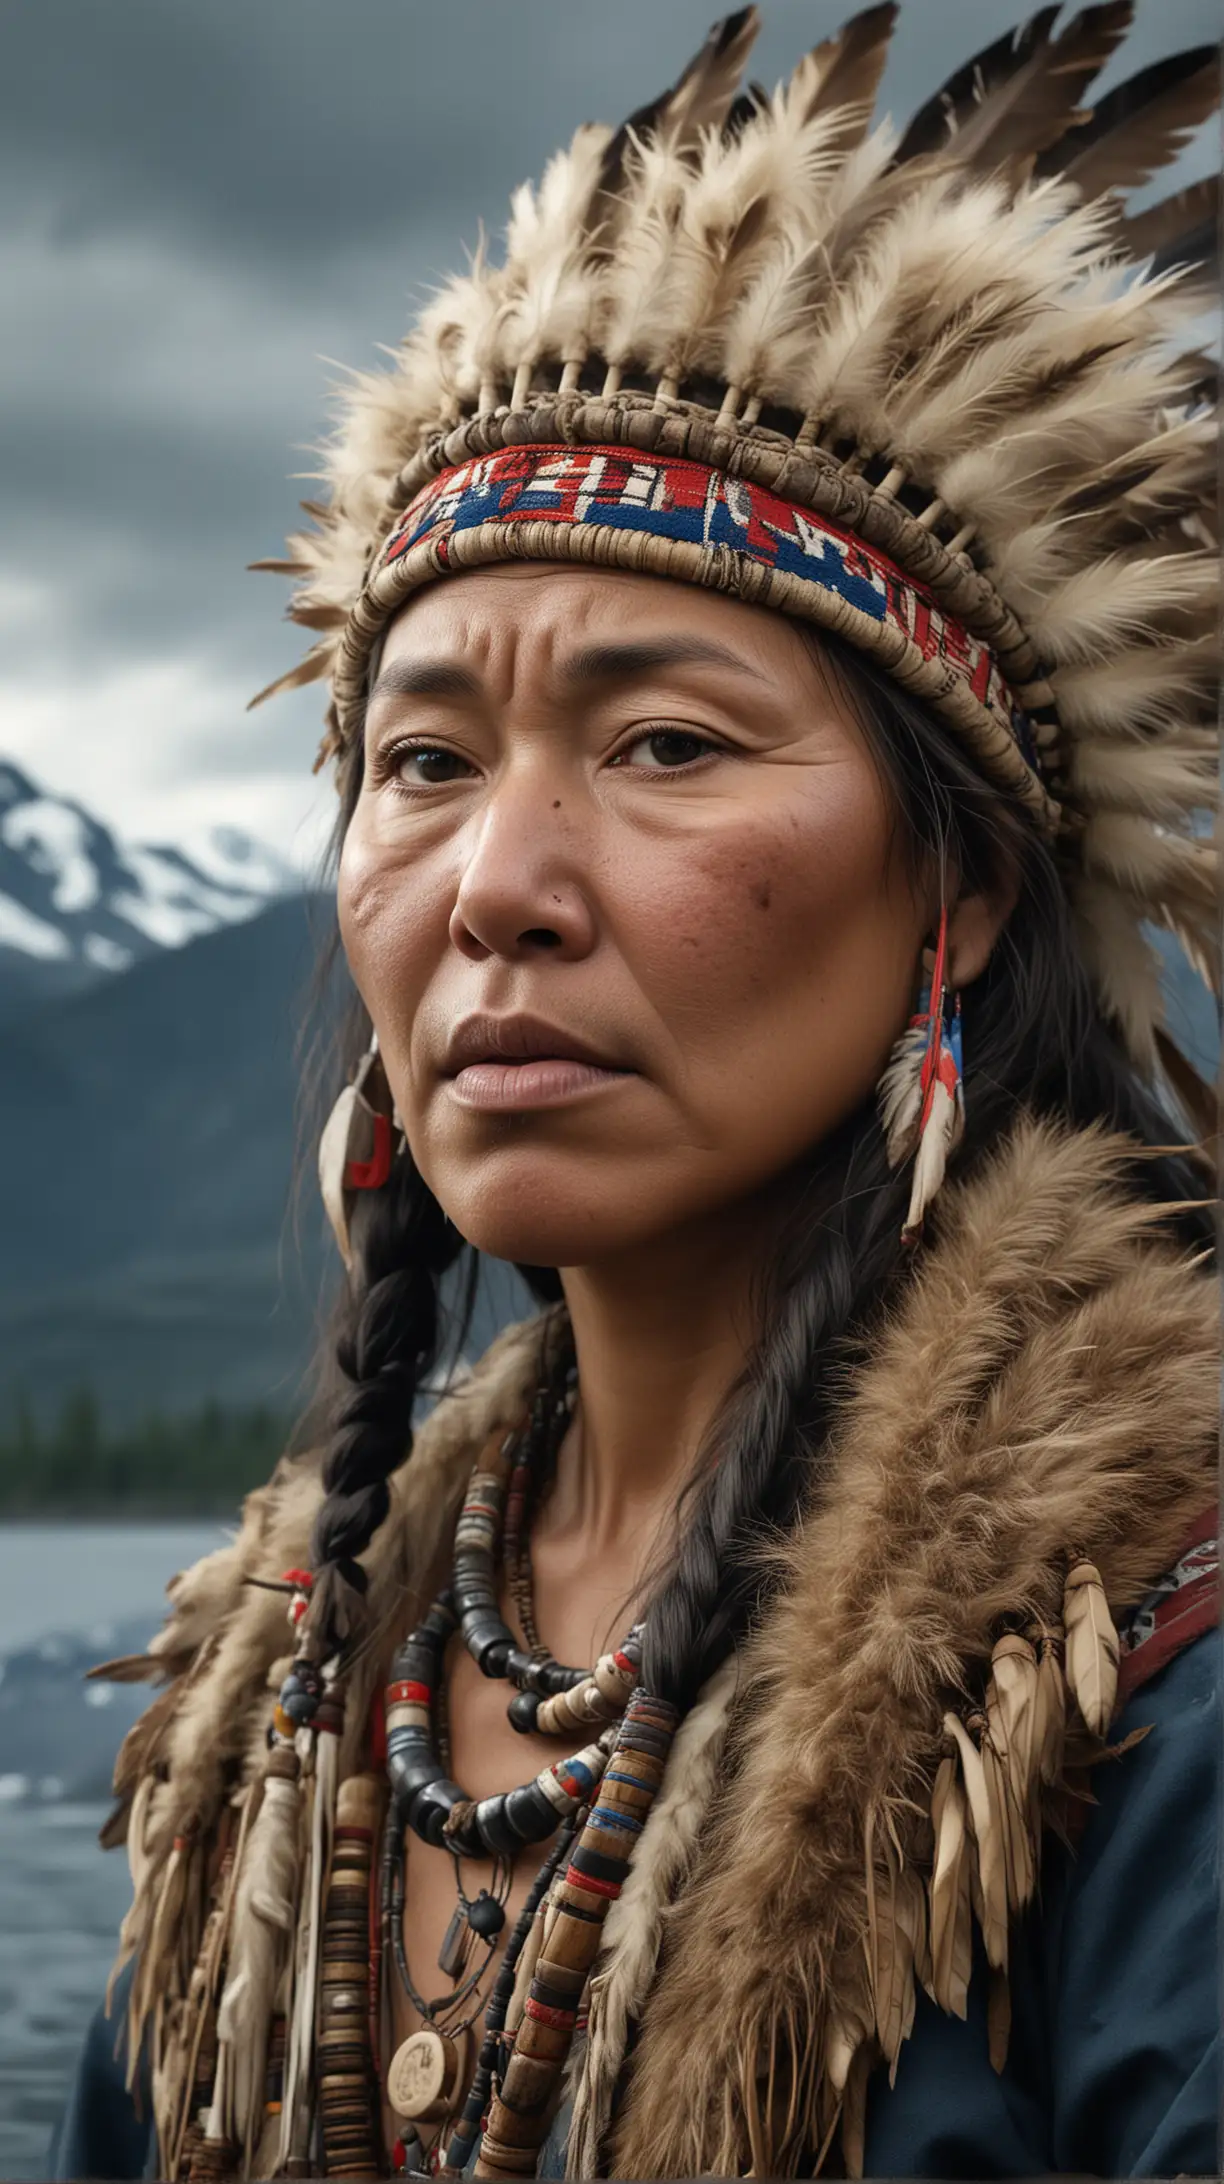 Show the reaction of the indigenous peoples of Alaska to the news of the sale, highlighting their concerns and uncertainties about the changing political landscape. Hyper realistic